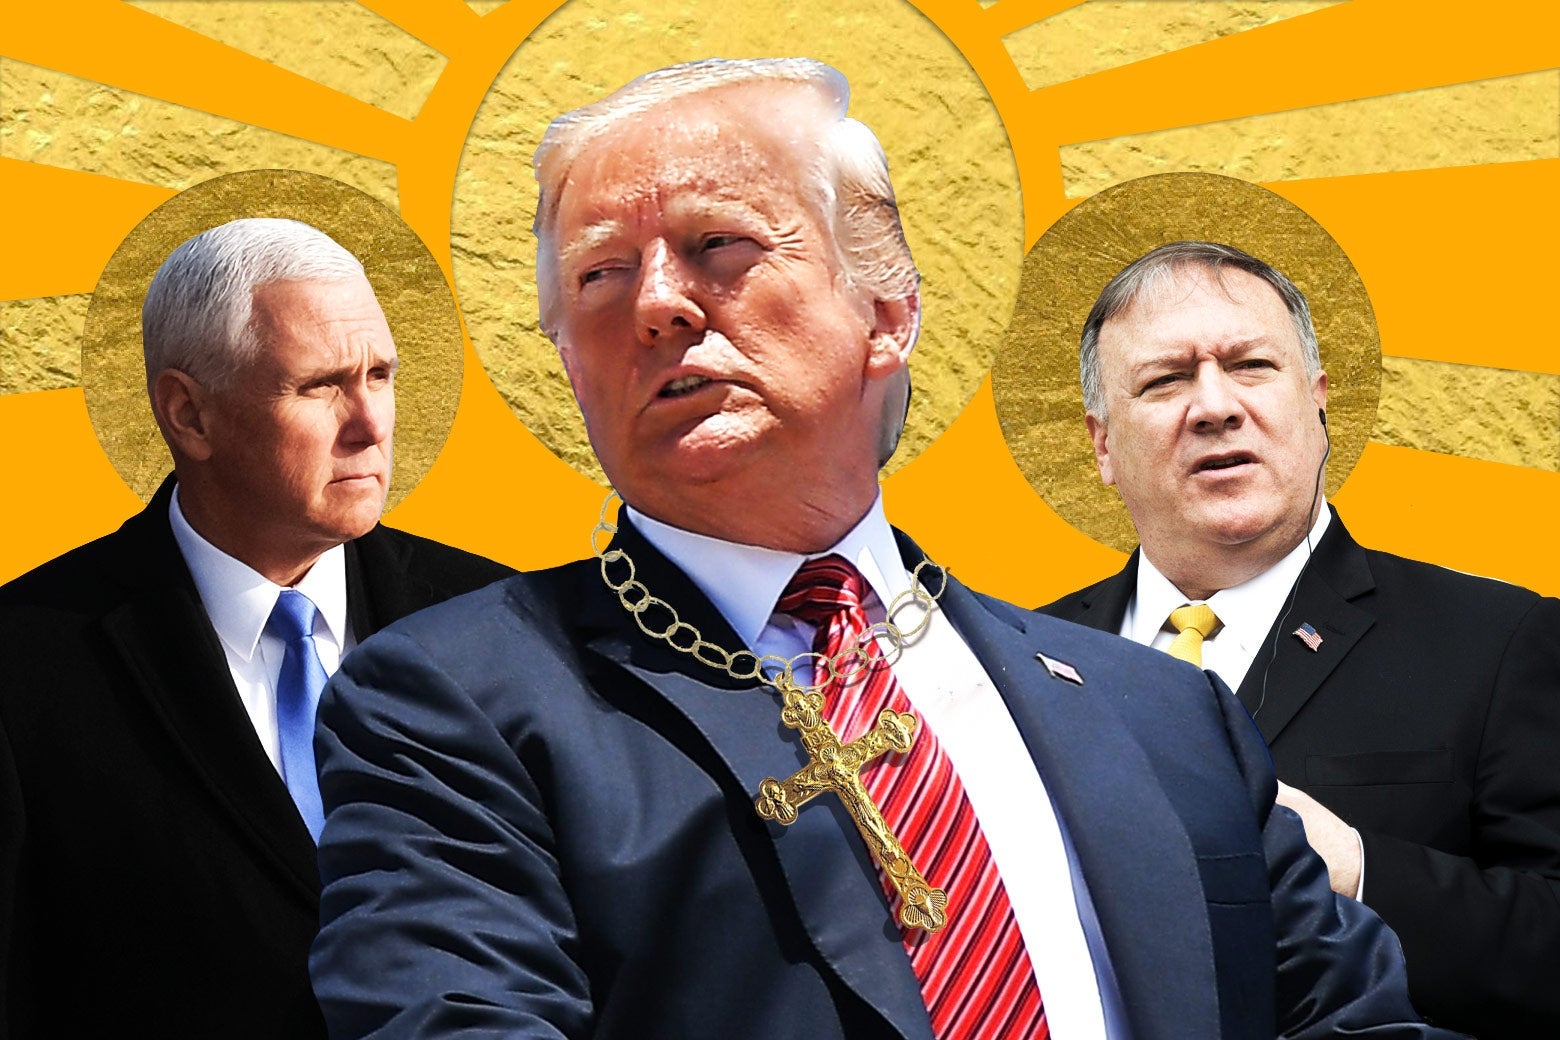 Mike Pence, Donald Trump, and Mike Pompeo, depicted as if in a religious painting.